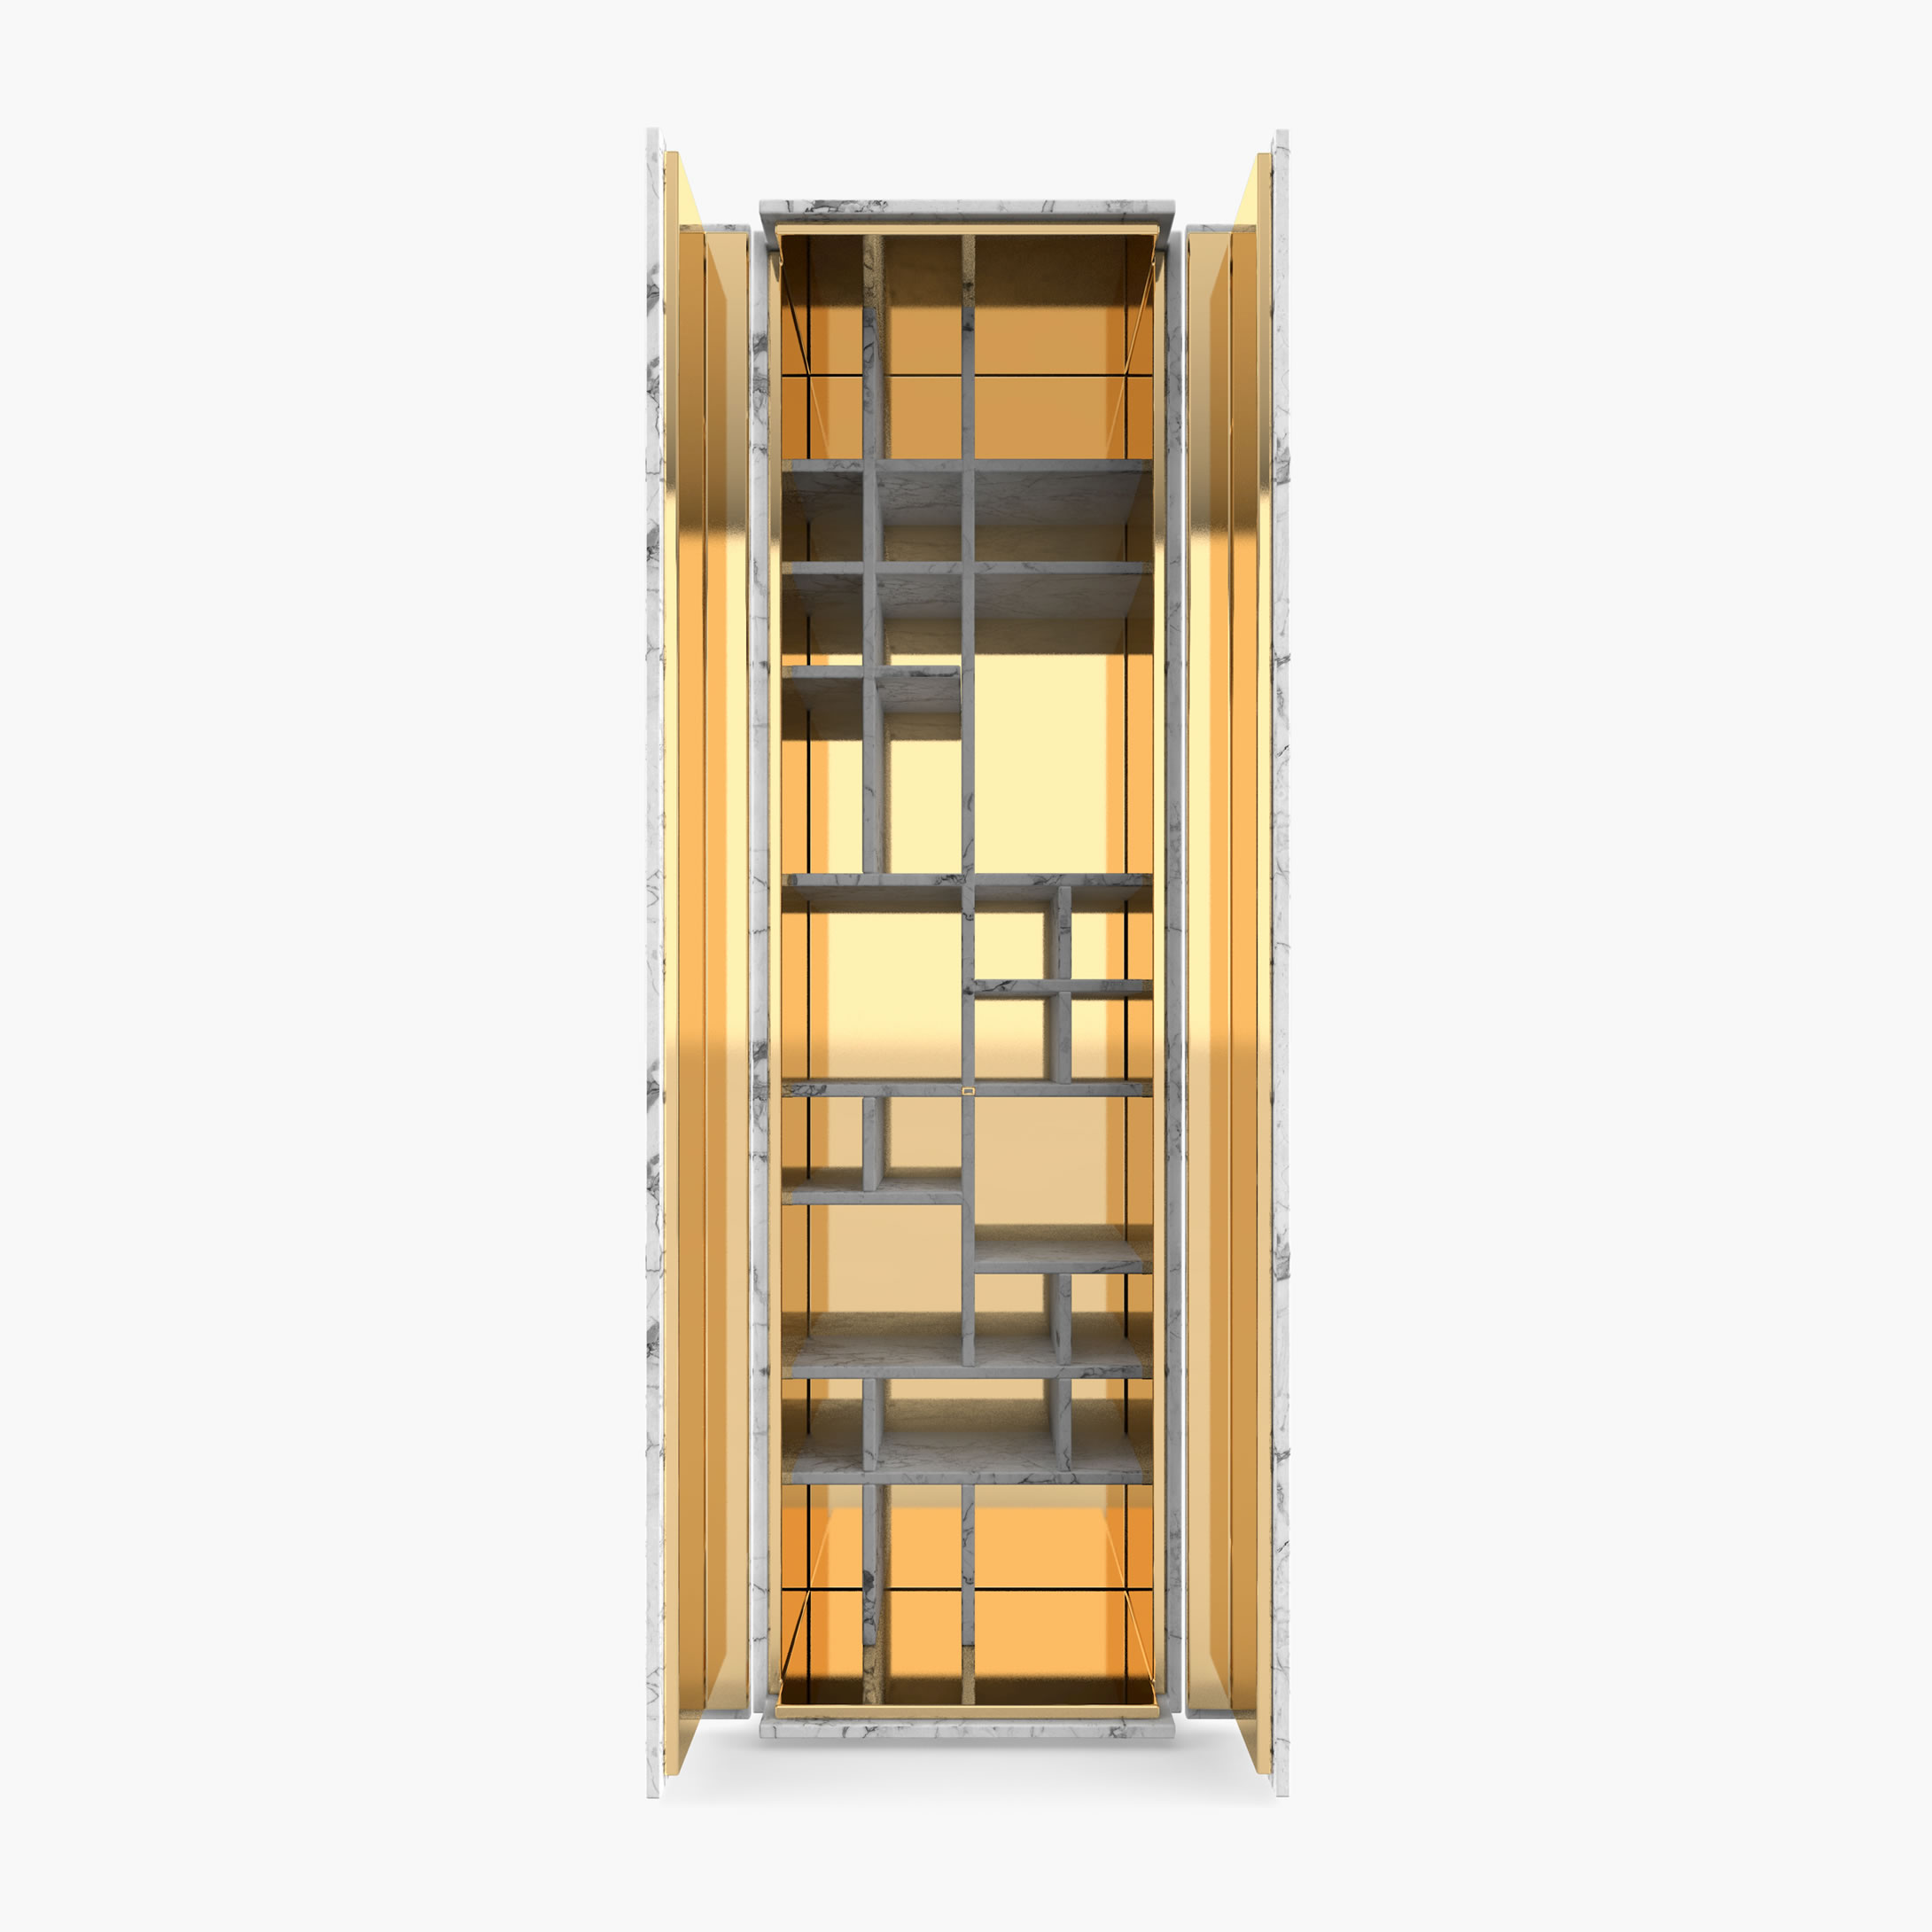 Cabinet of cuboids White Arabescato Marble collectible Living Room designs Cabinets FS 146 B FELIX SCHWAKE